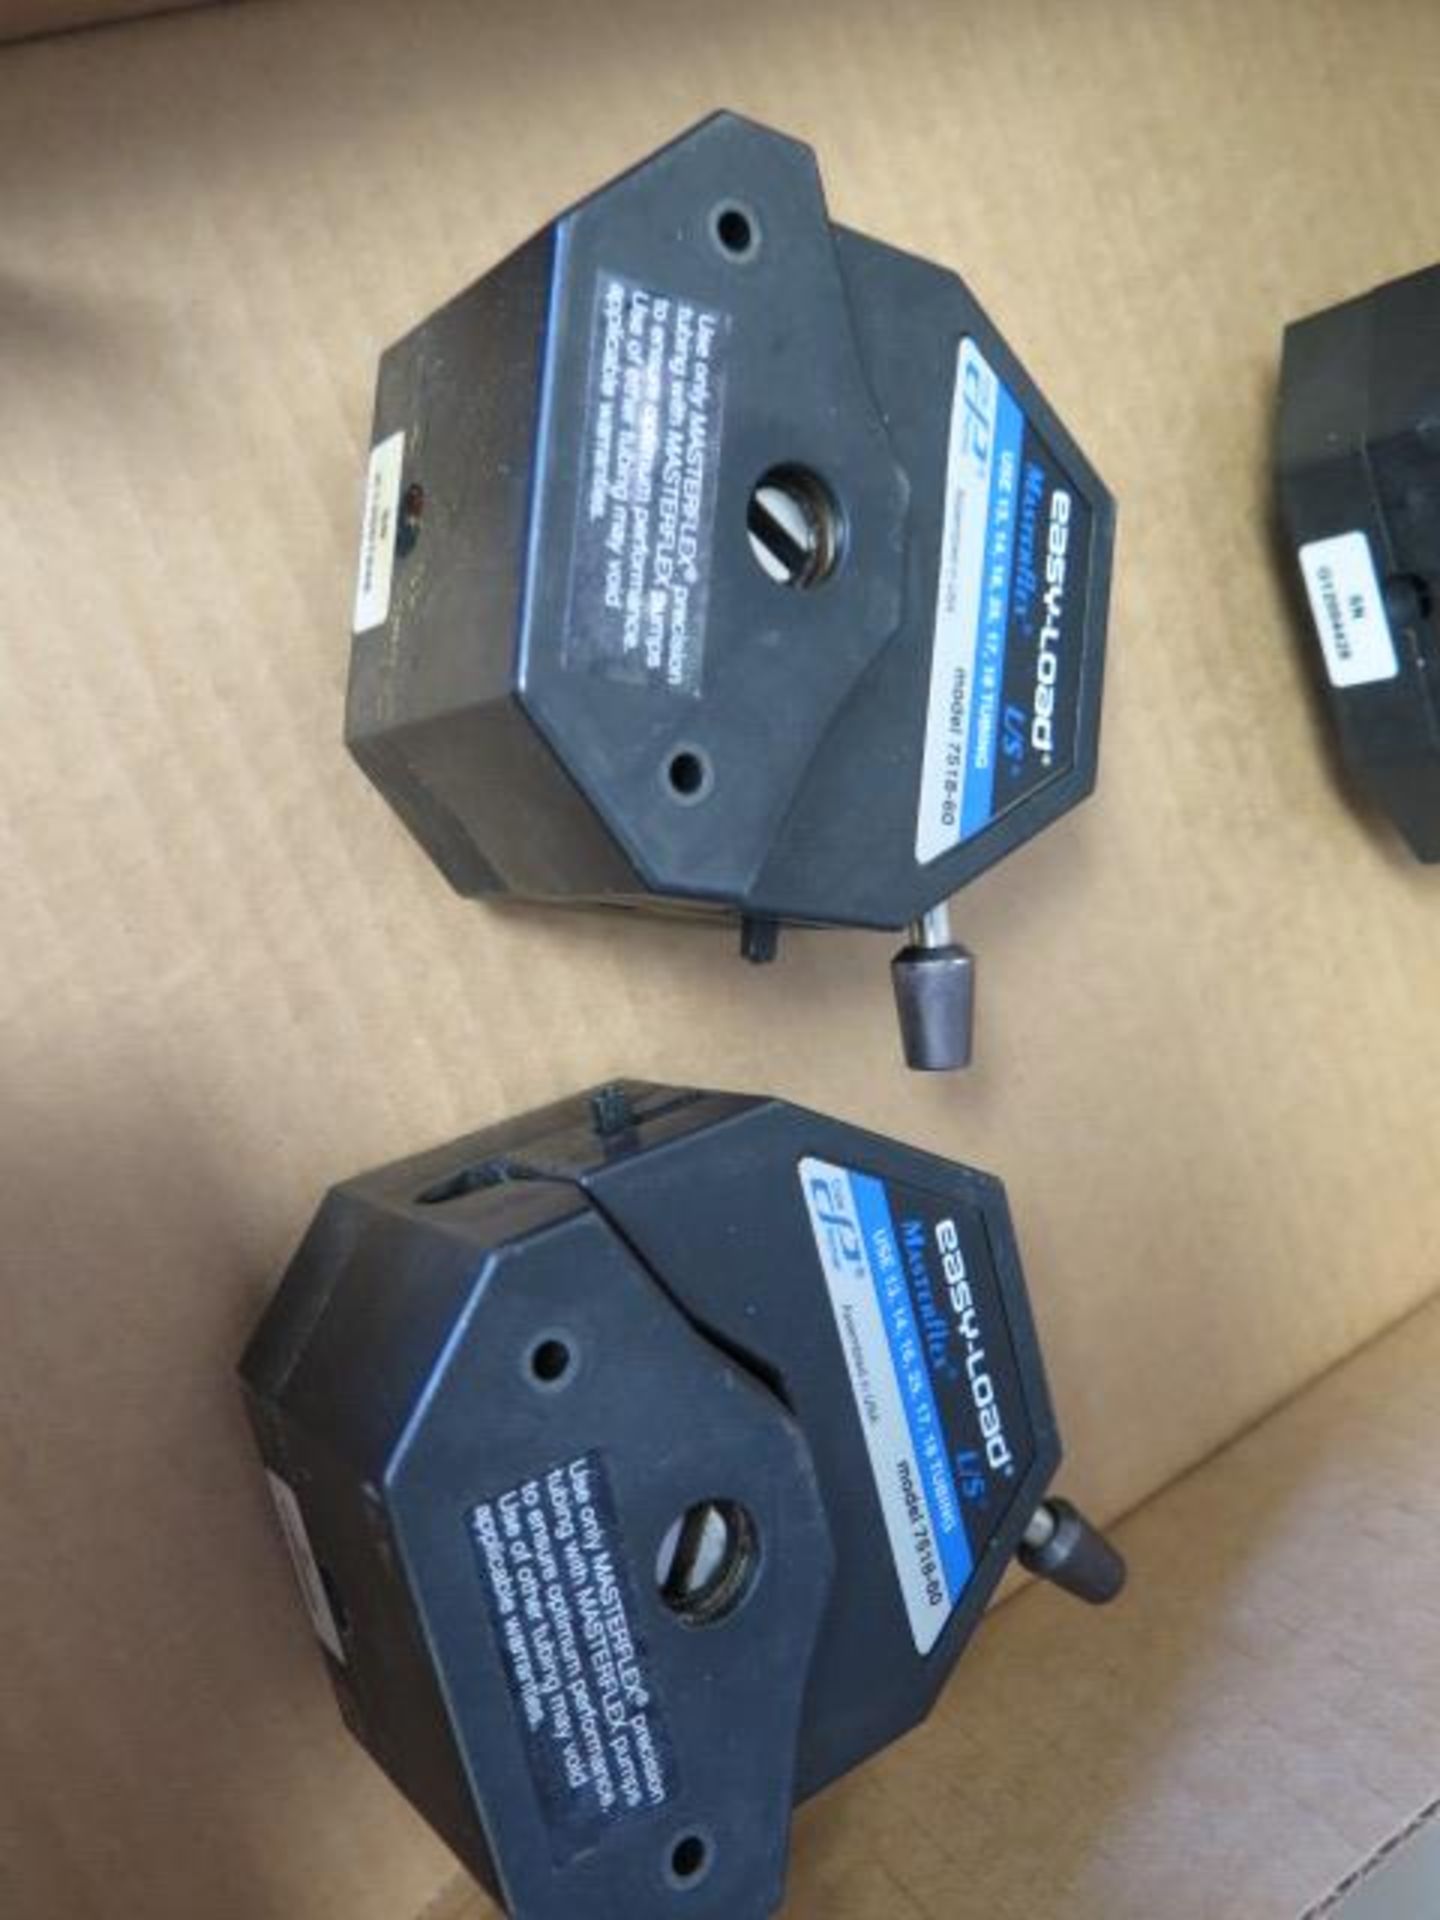 Cole-Parmer mdl. 77200-62 and 7518-61 Parastaltic Pump Heads (3) (SOLD AS-IS - NO WARRANTY) - Image 3 of 5